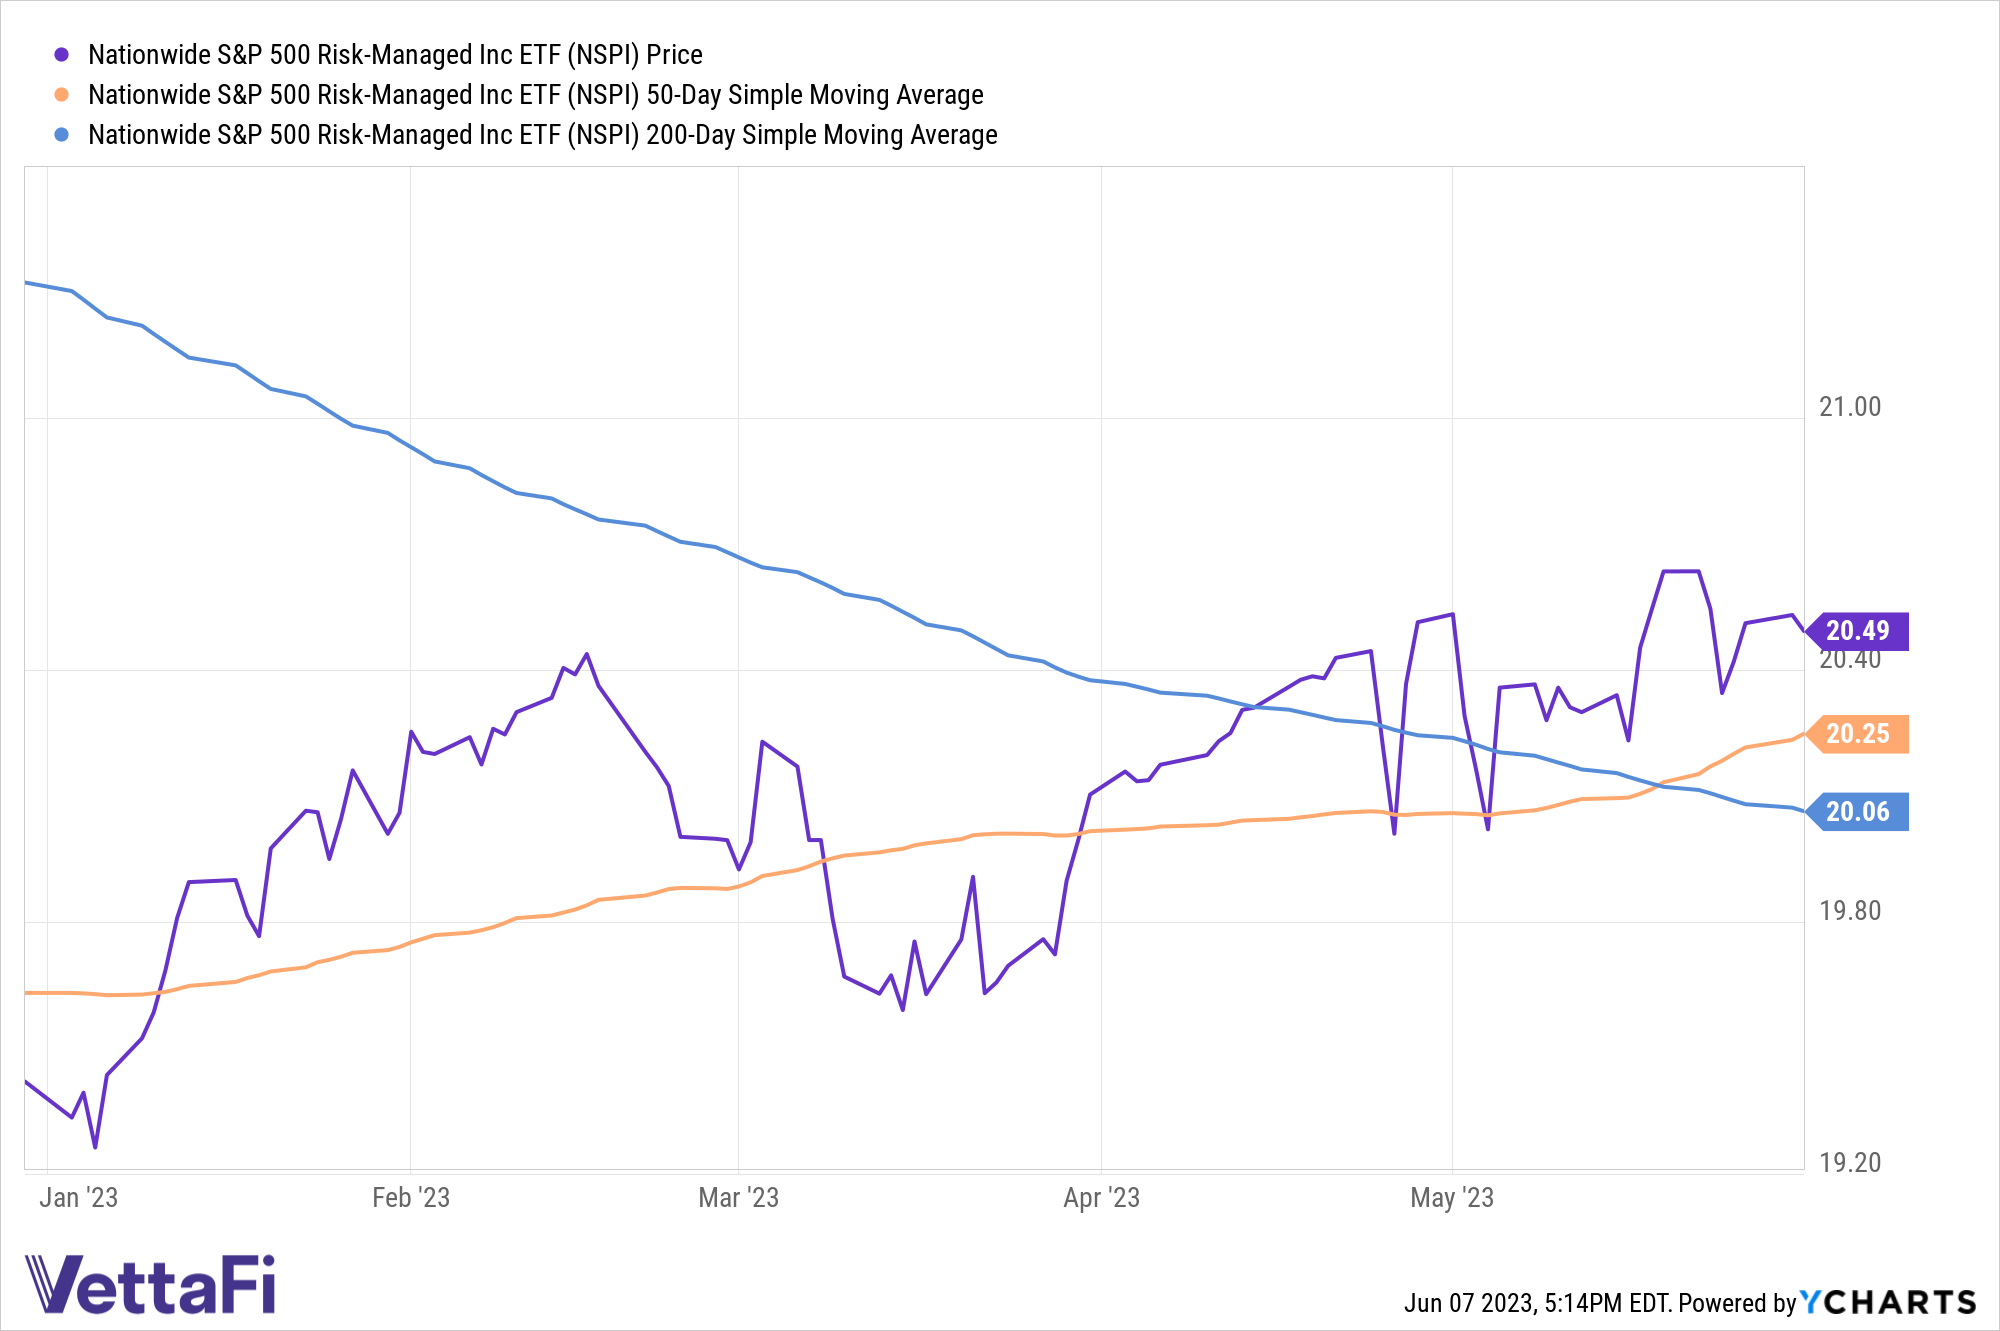 Price performance chart of NSPI year-to-date as of the end of May at 20.49. The fund was above both its 50-day SMA of 20.25 and its 200-day SMA of 20.03